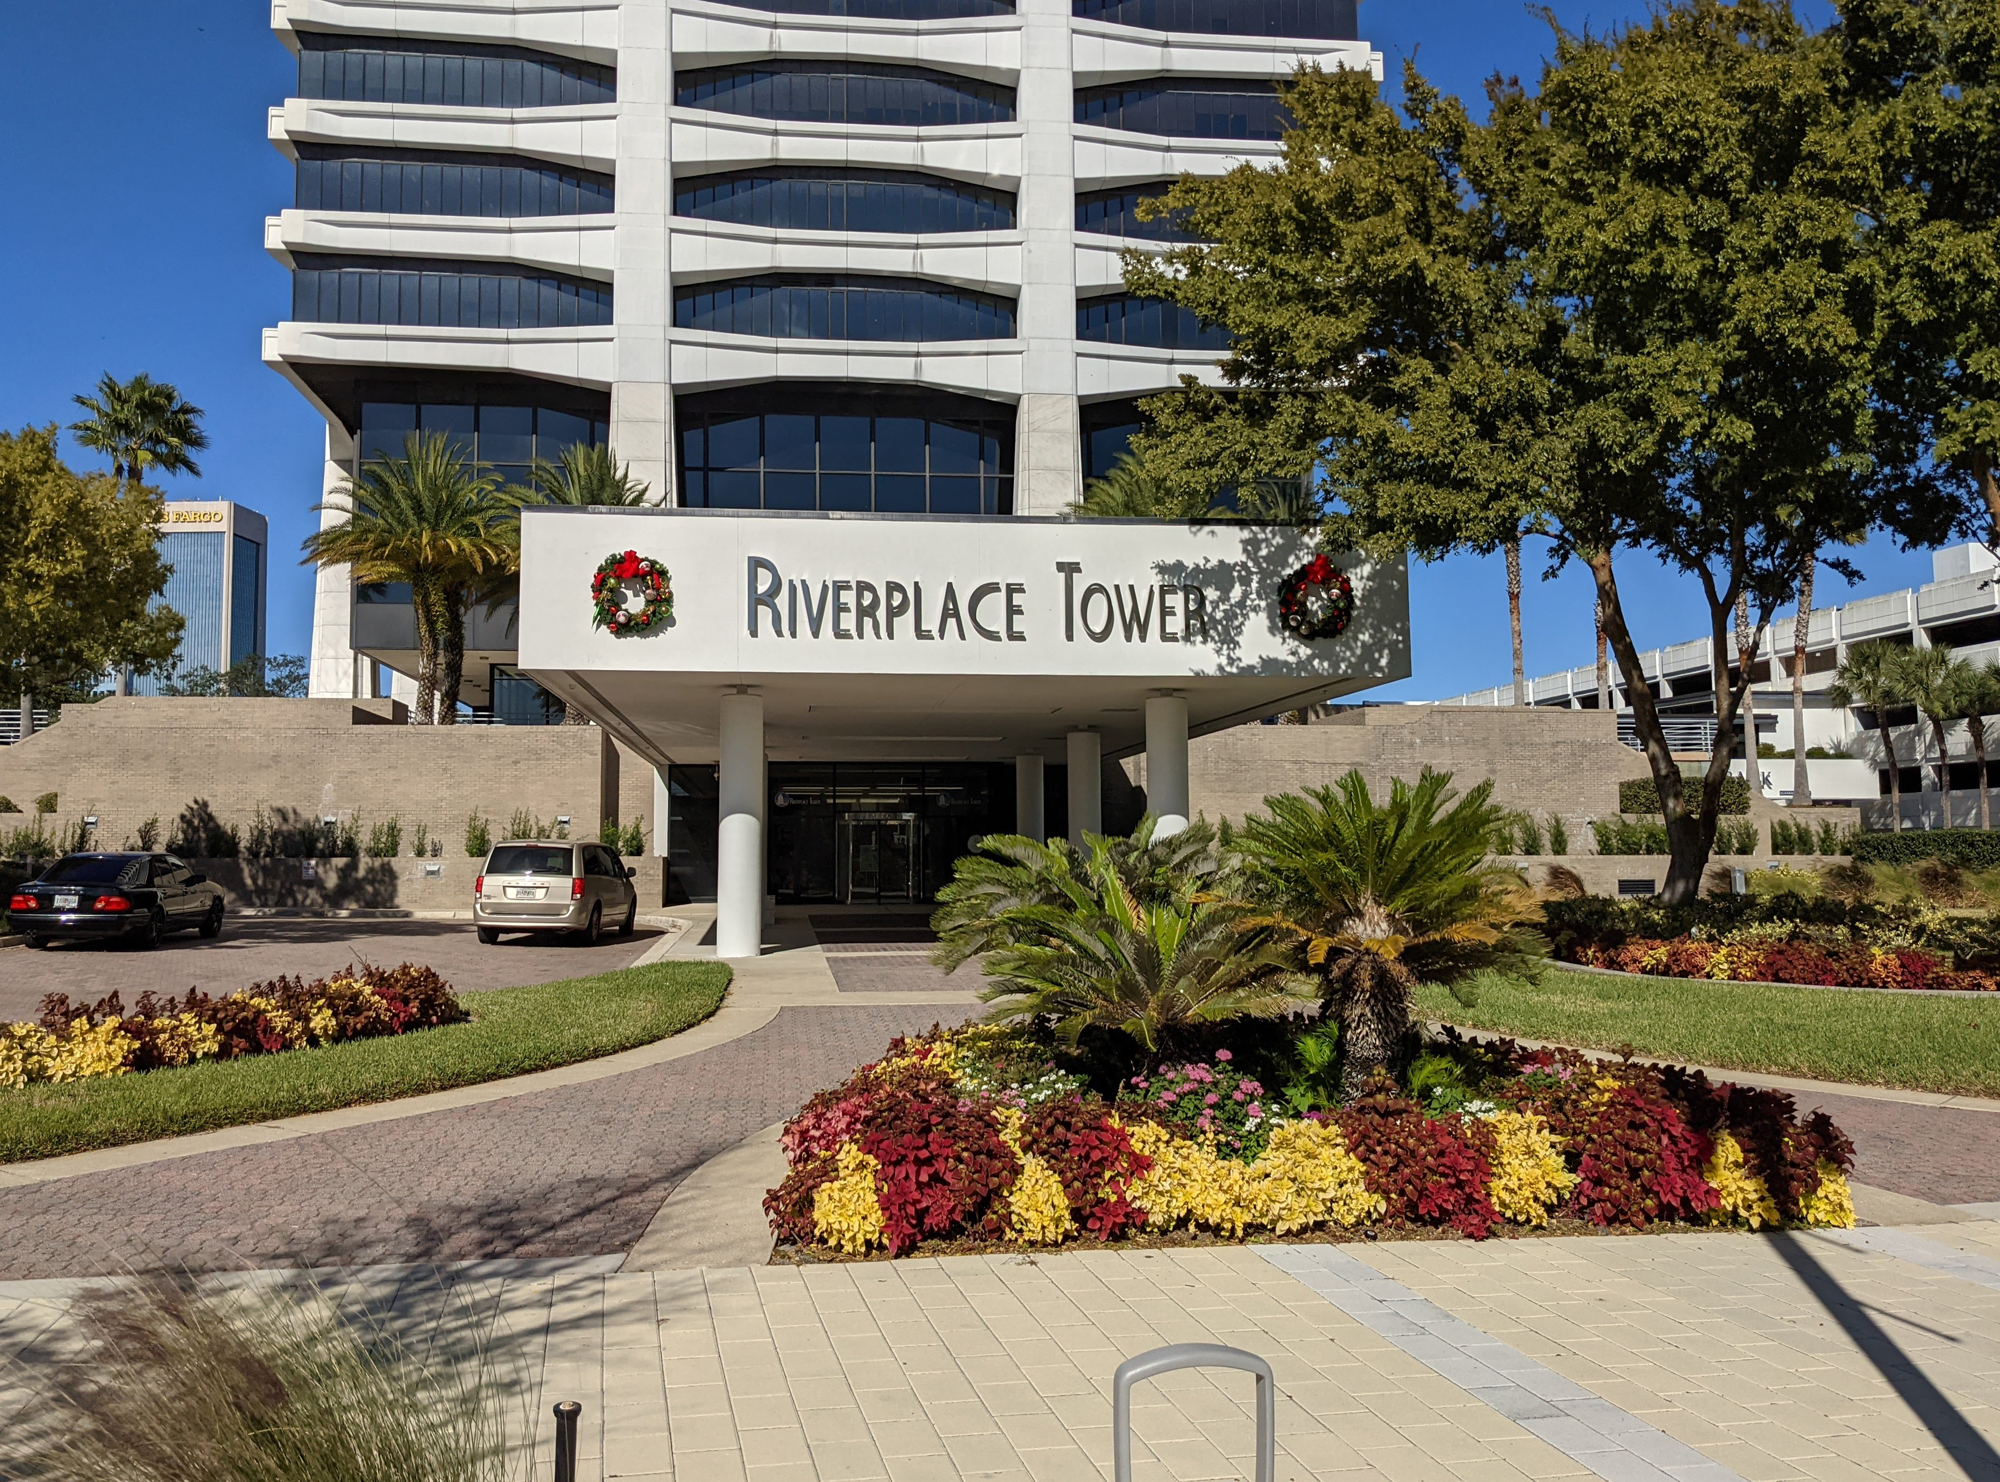 The 28-story, 460,000-square-foot Class A office building and 765-space parking garage and a parking lot comprise 8.6 acres at 1301 Riverplace Blvd.